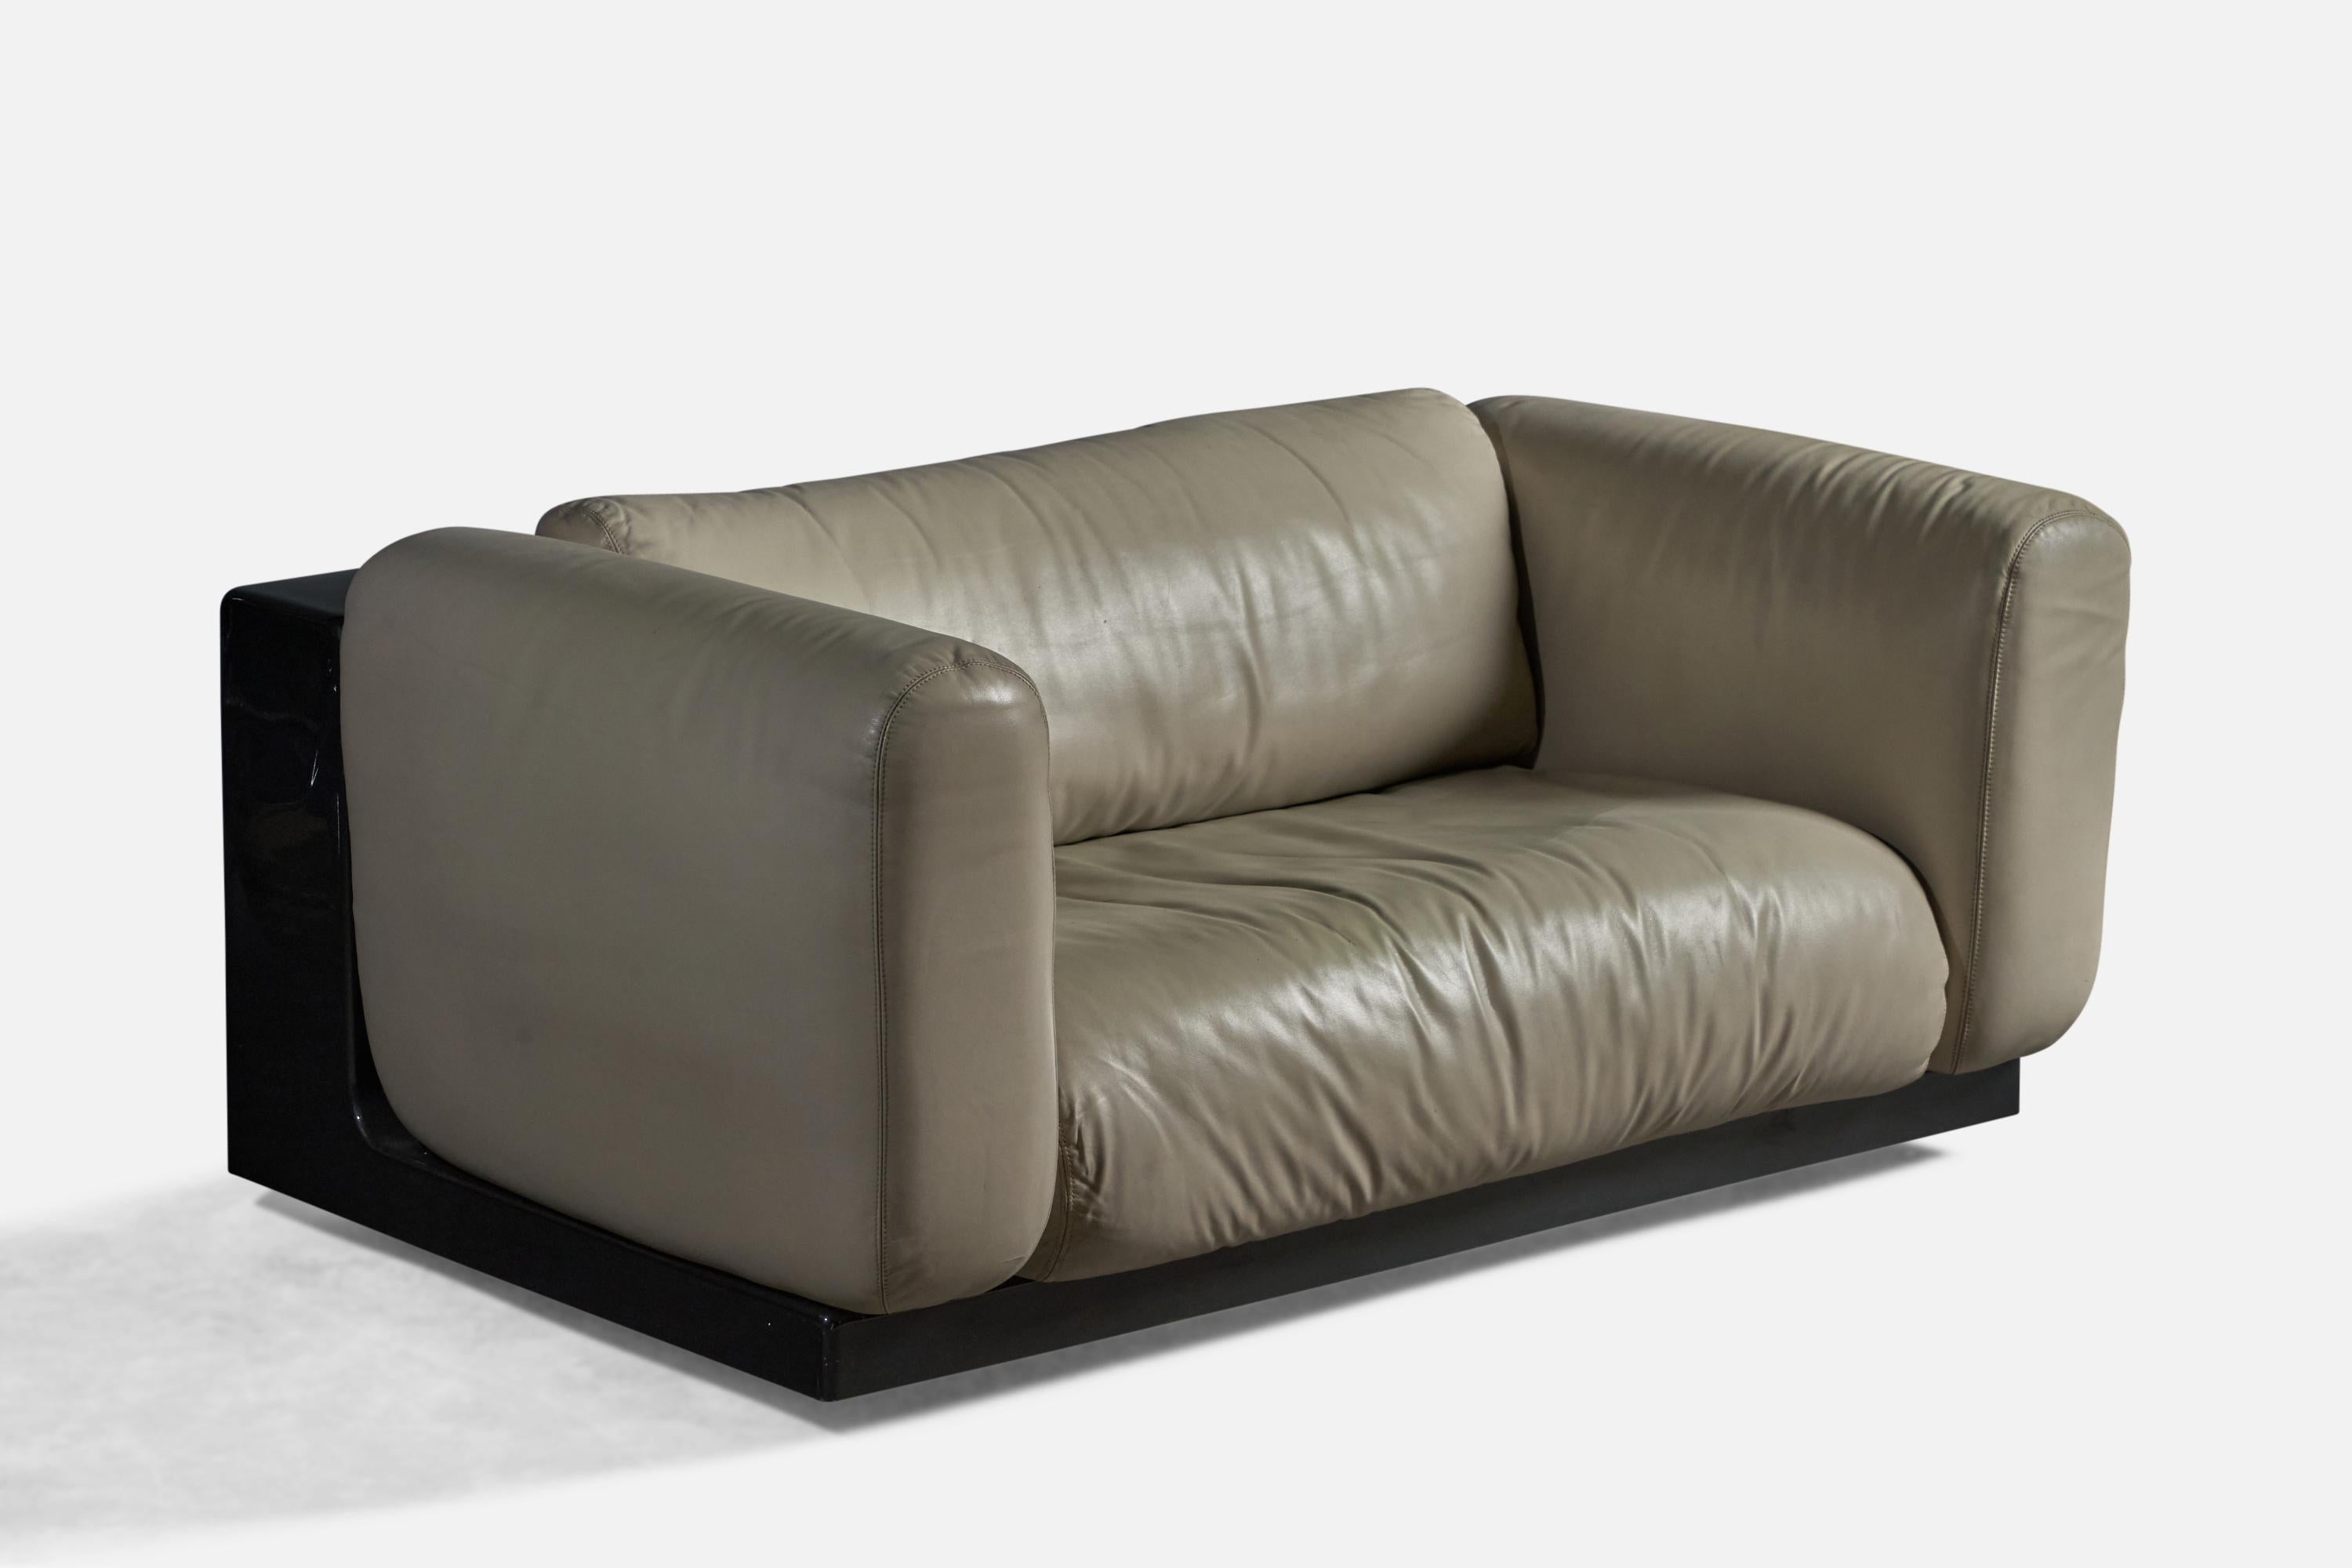 A two-seater black ABS plastic and white / light grey leather sofa, designed by Cini Boeri, and produced by Gavina, Knoll, 1970s.

Backside features a built in shelf14” seat height